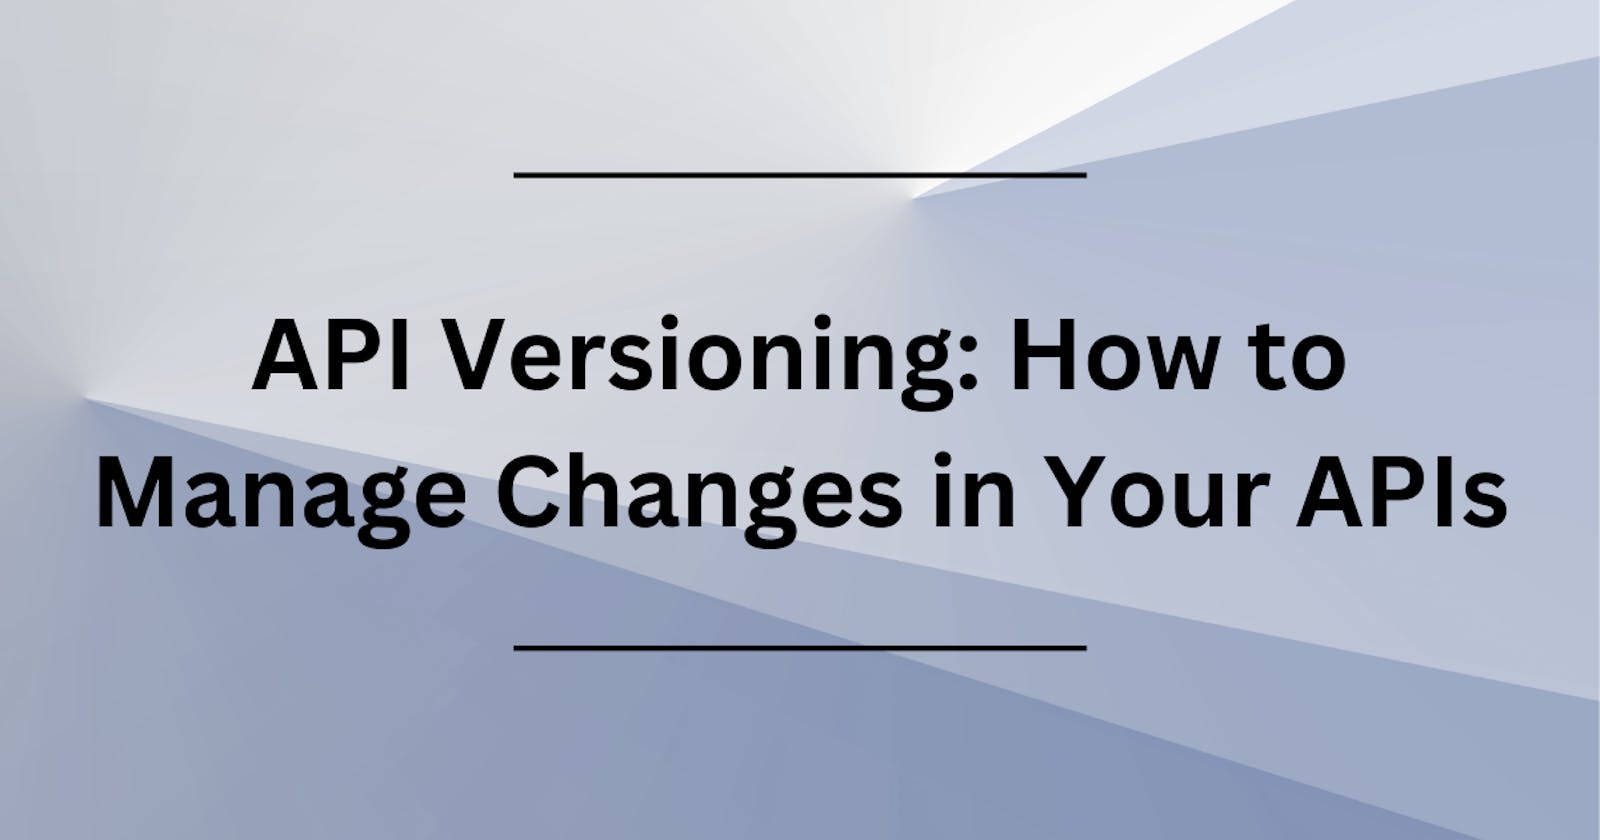 API Versioning: How to Manage Changes in Your APIs